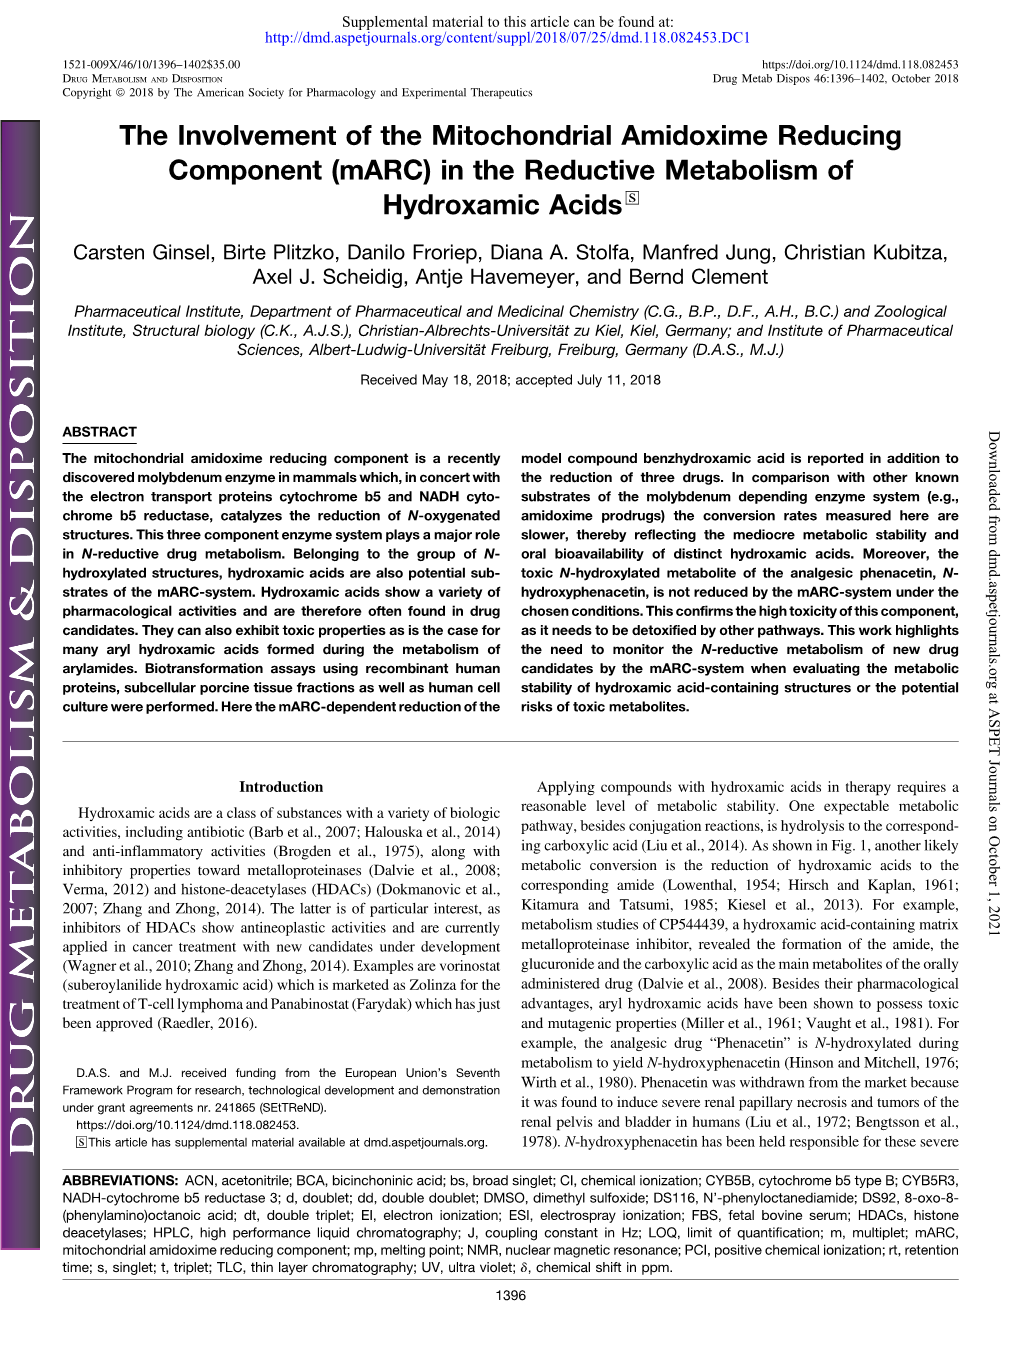 (Marc) in the Reductive Metabolism of Hydroxamic Acids S